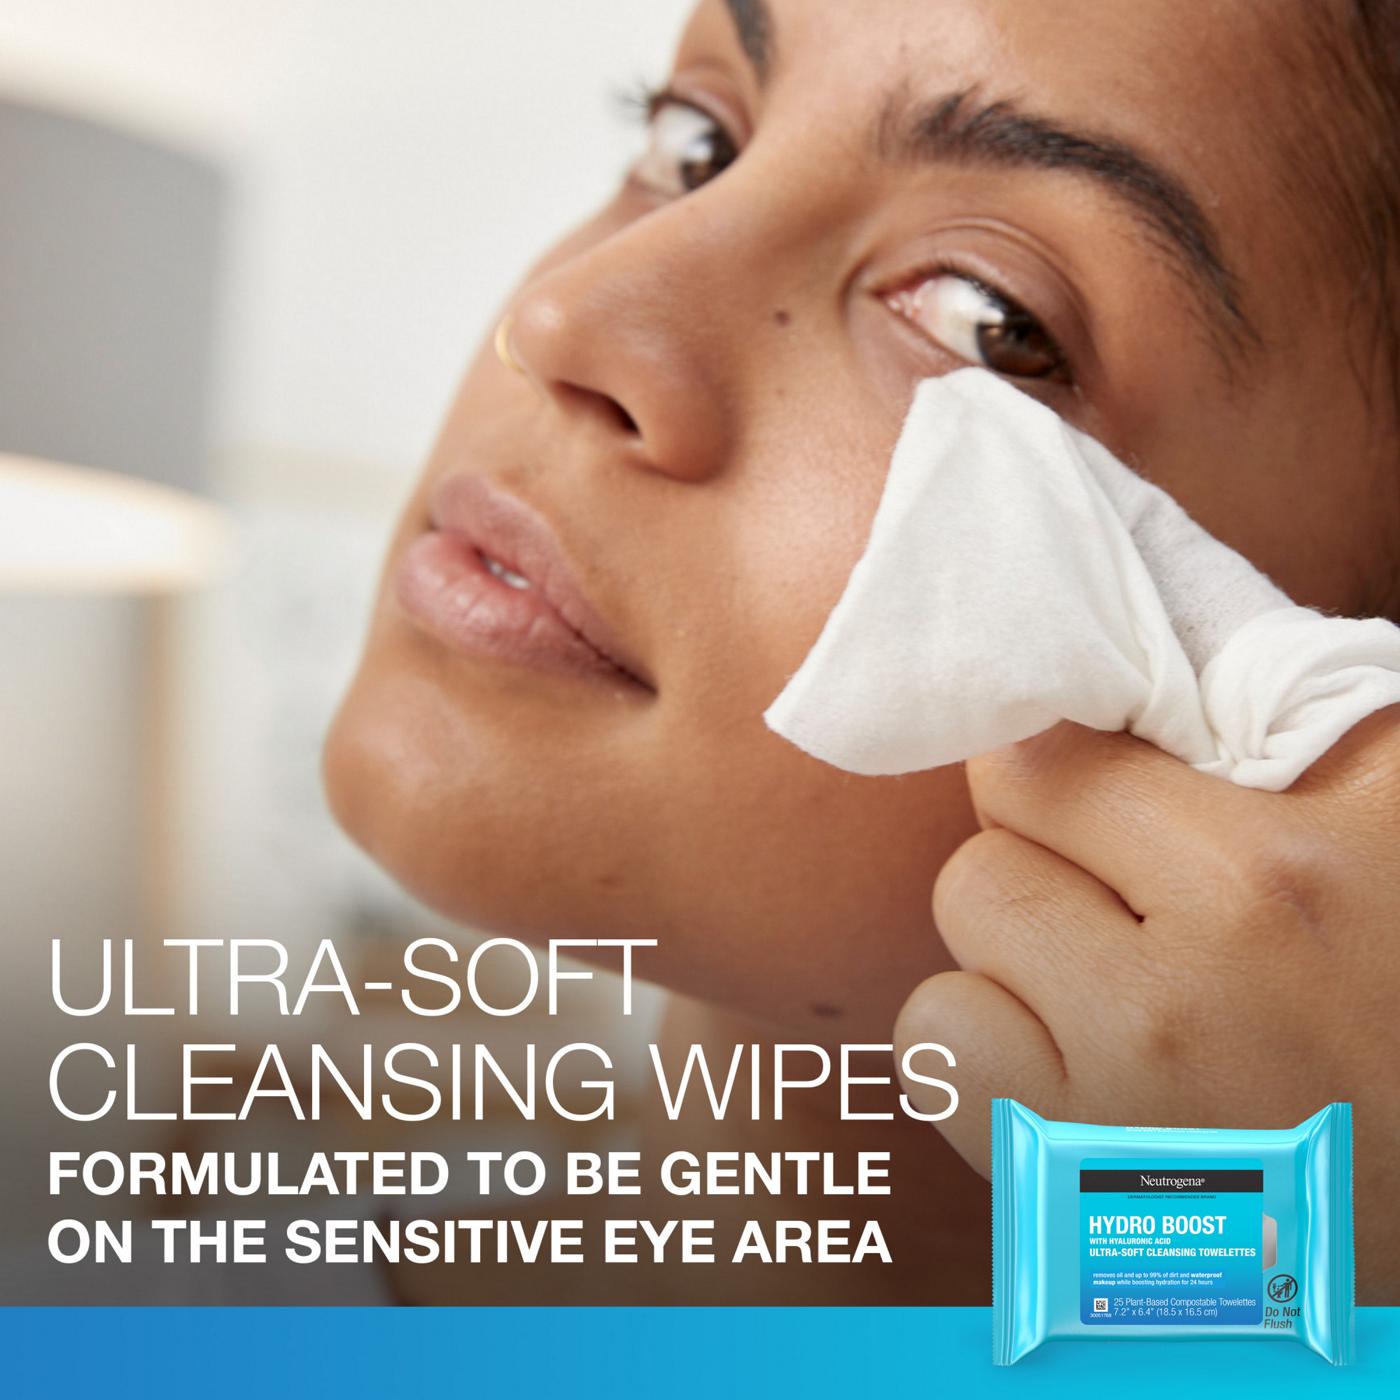 Neutrogena Hydro Boost Facial Cleansing Wipes - Twin Pack; image 7 of 7